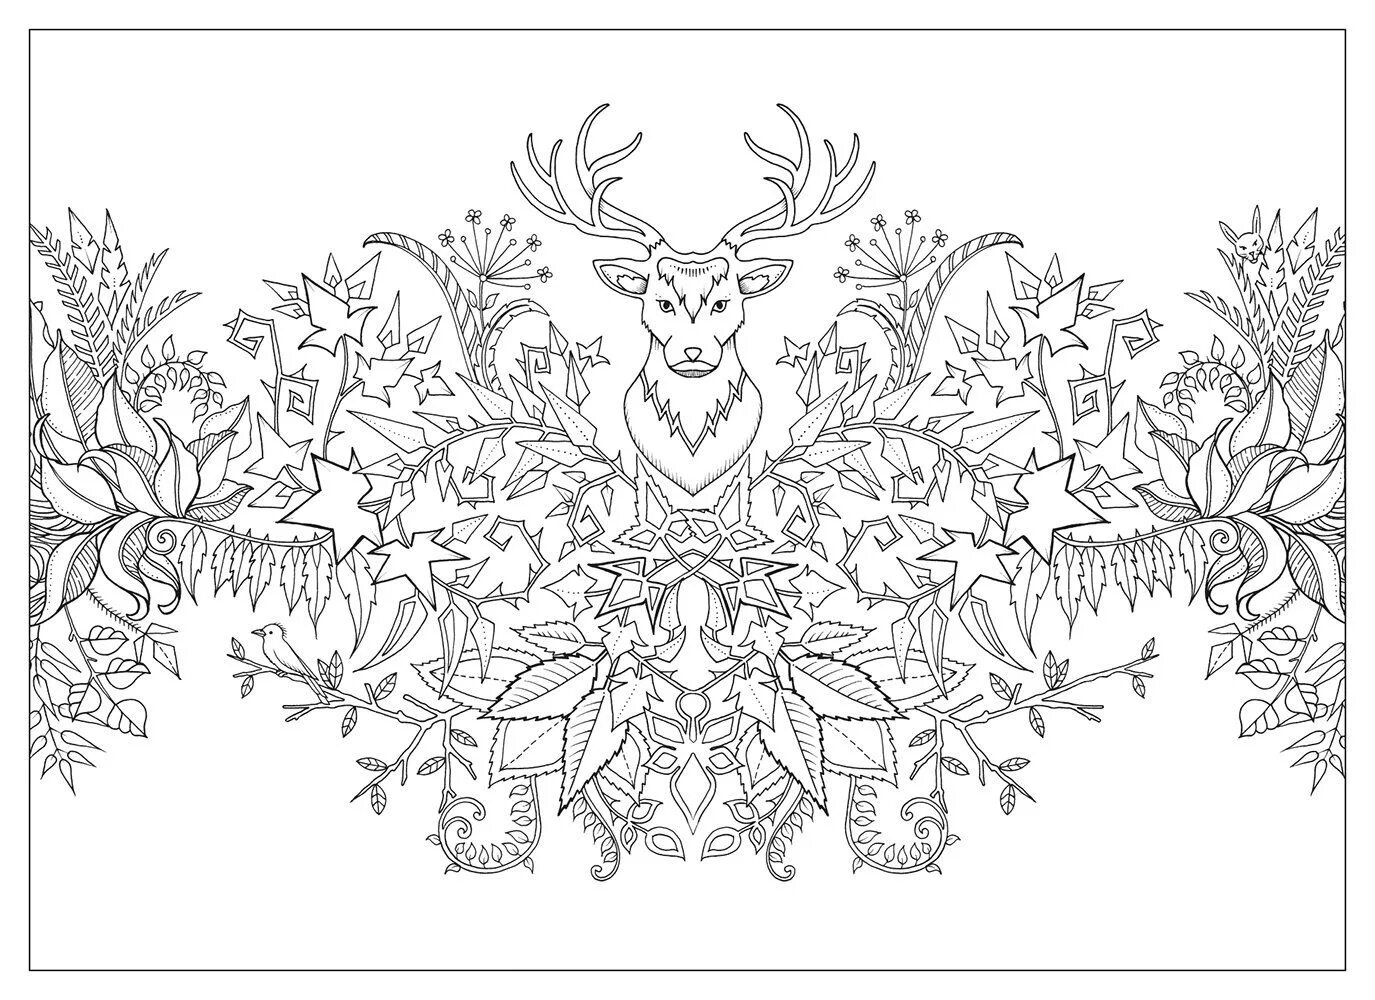 Luxury anti-stress forest coloring book